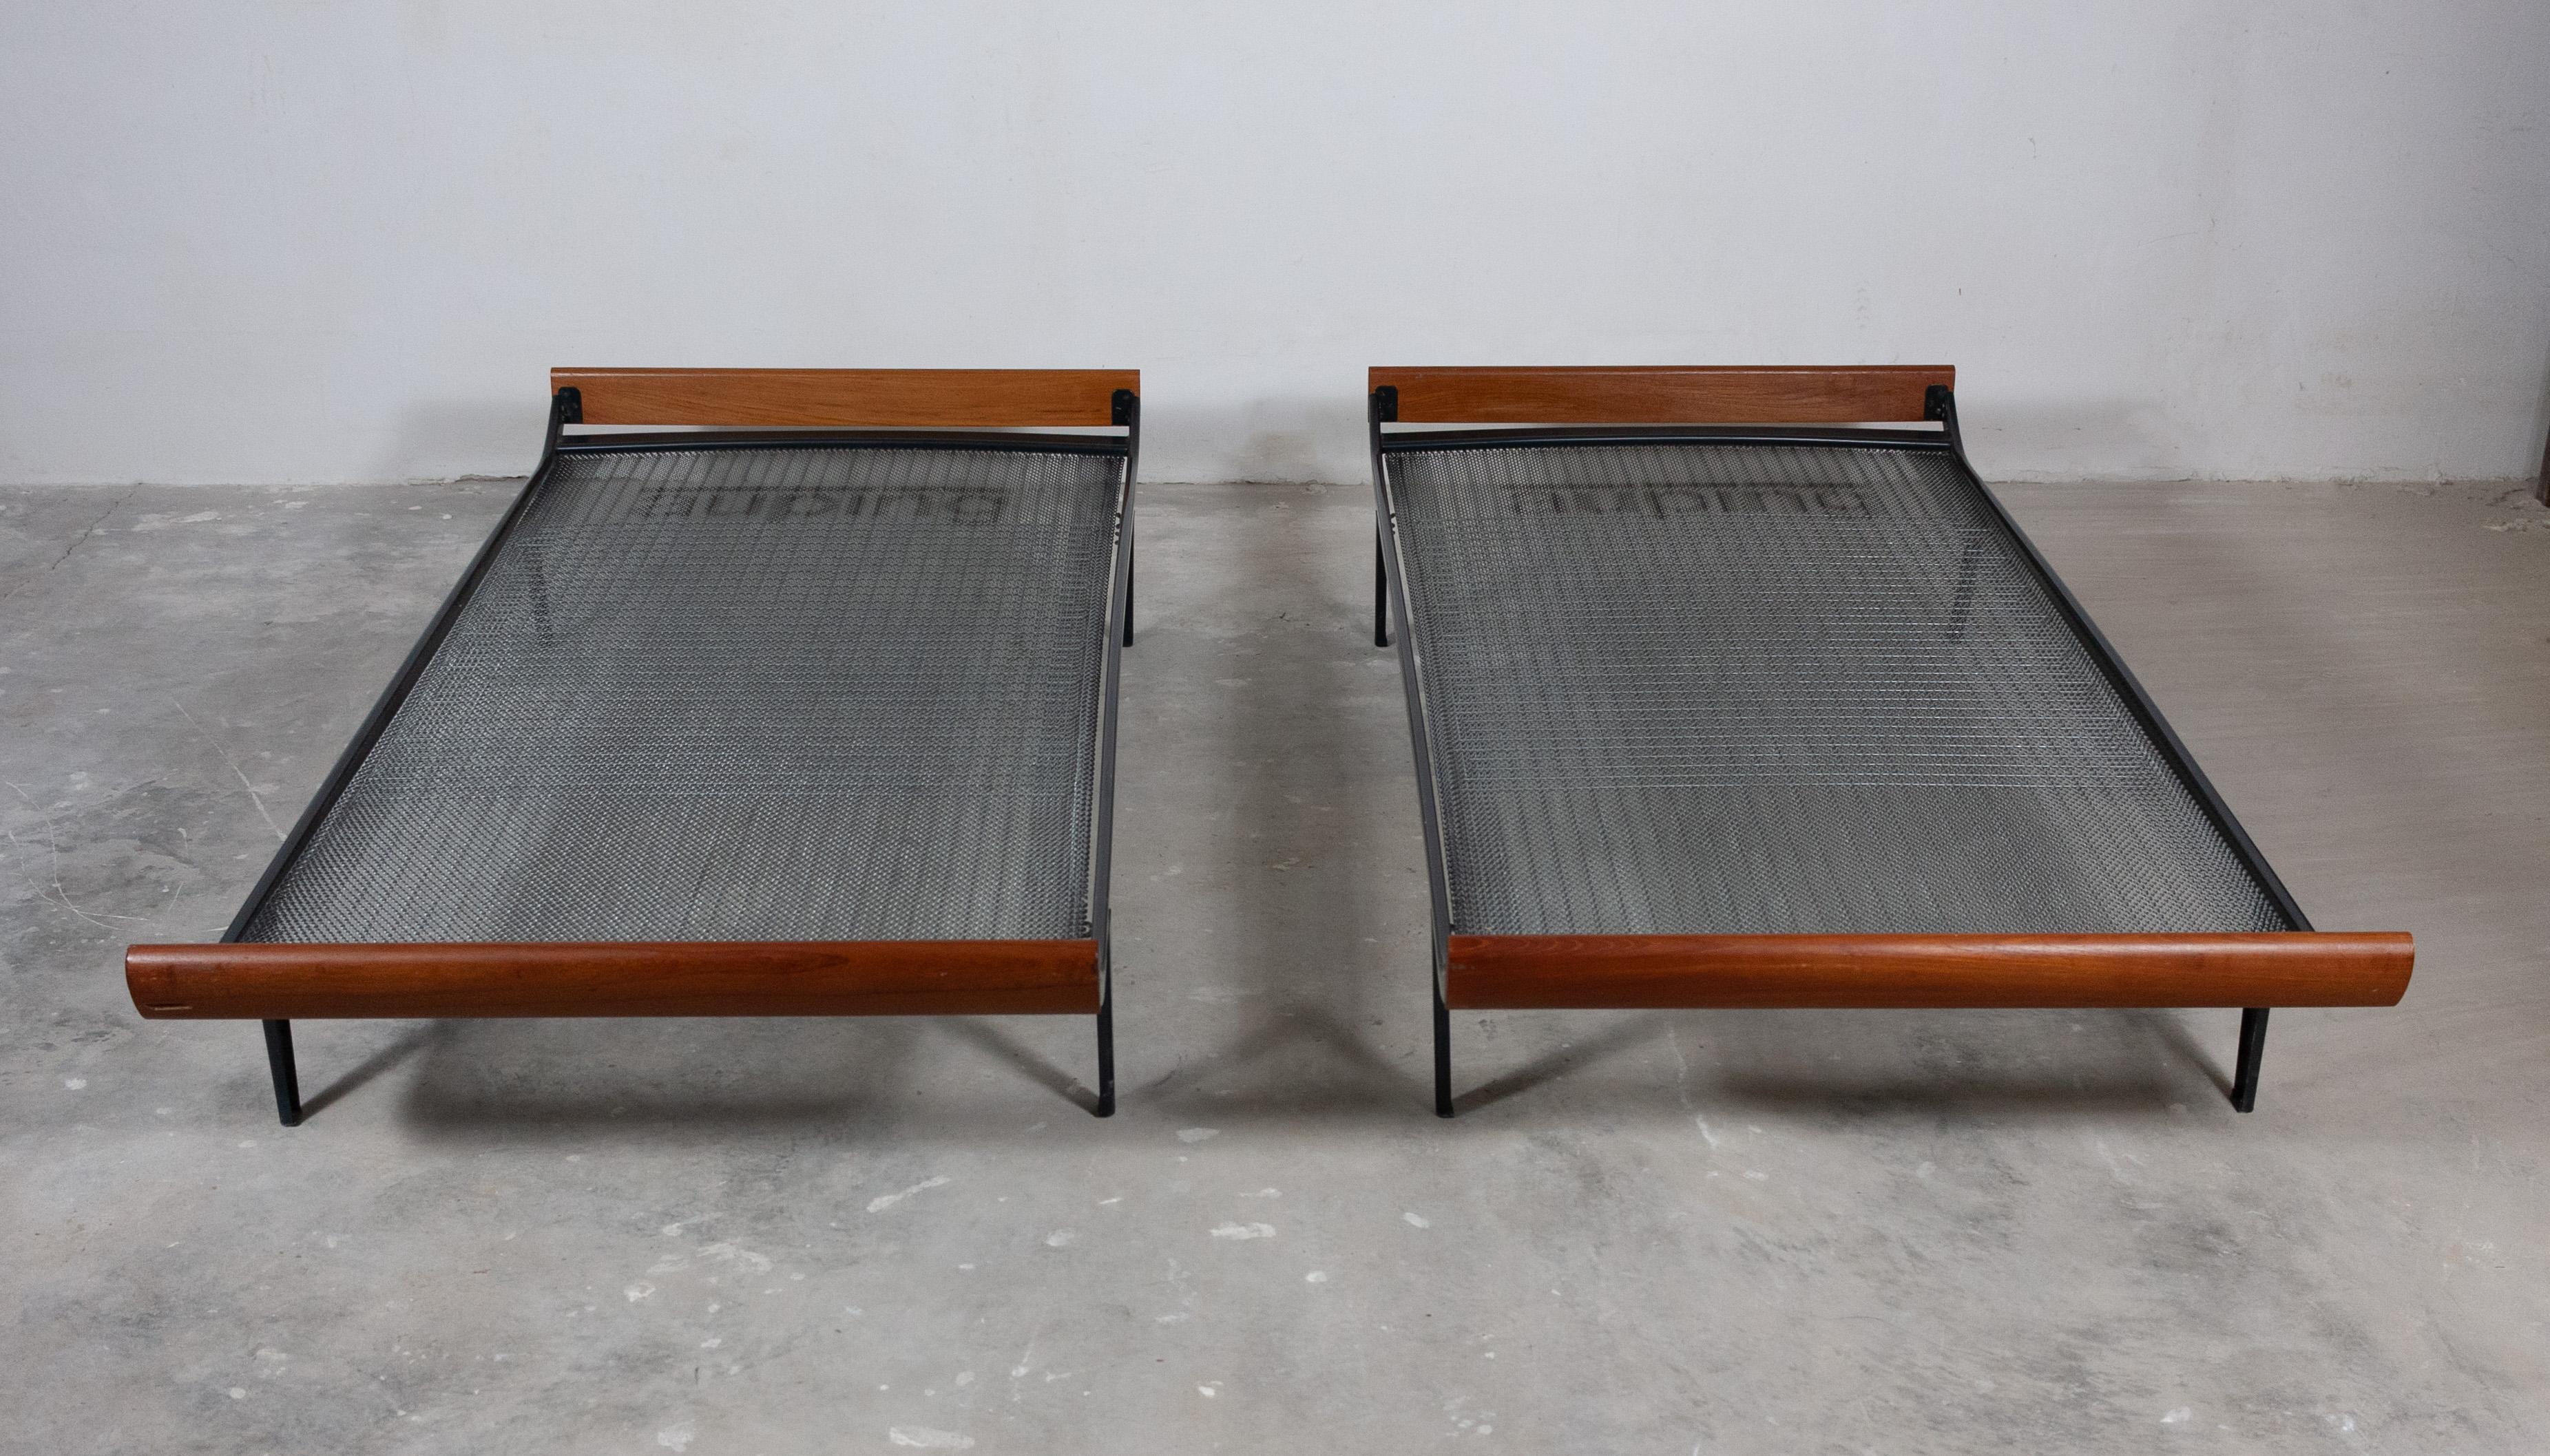 Two Cleopatra daybeds. A breakthrough for the Auping bed company designed by Dick Cordemeijer. It was originally envisioned as a sofa bed which could transform into a living room sofa by adding cushions, making it perfect for the often relatively